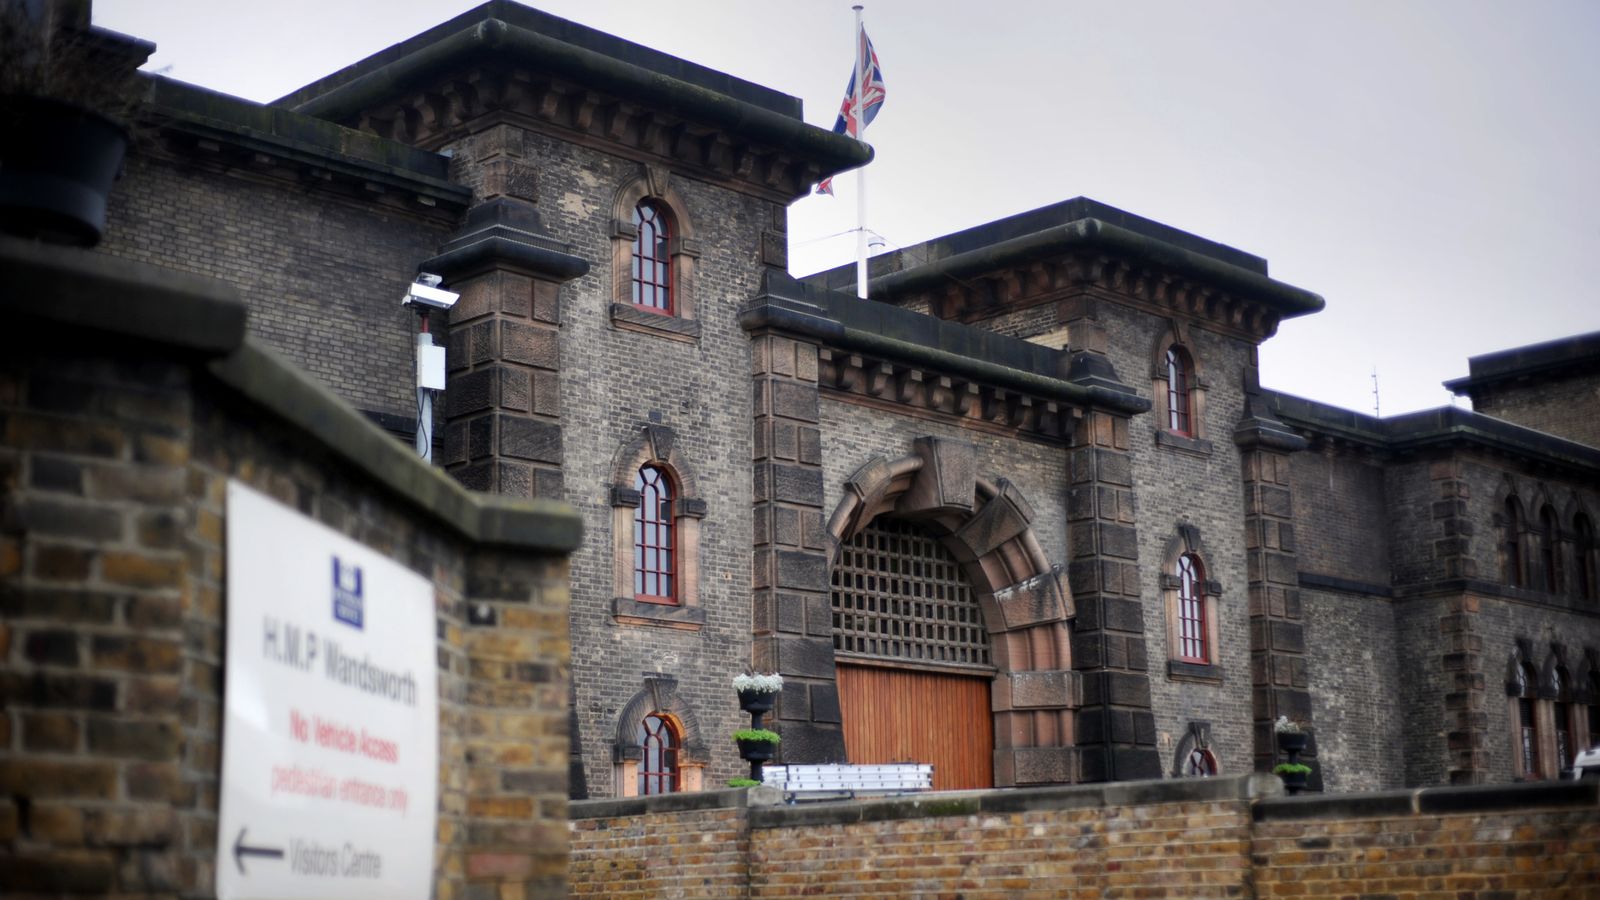 Inmate stabbed at HMP Wandsworth - days after terror suspect's escape